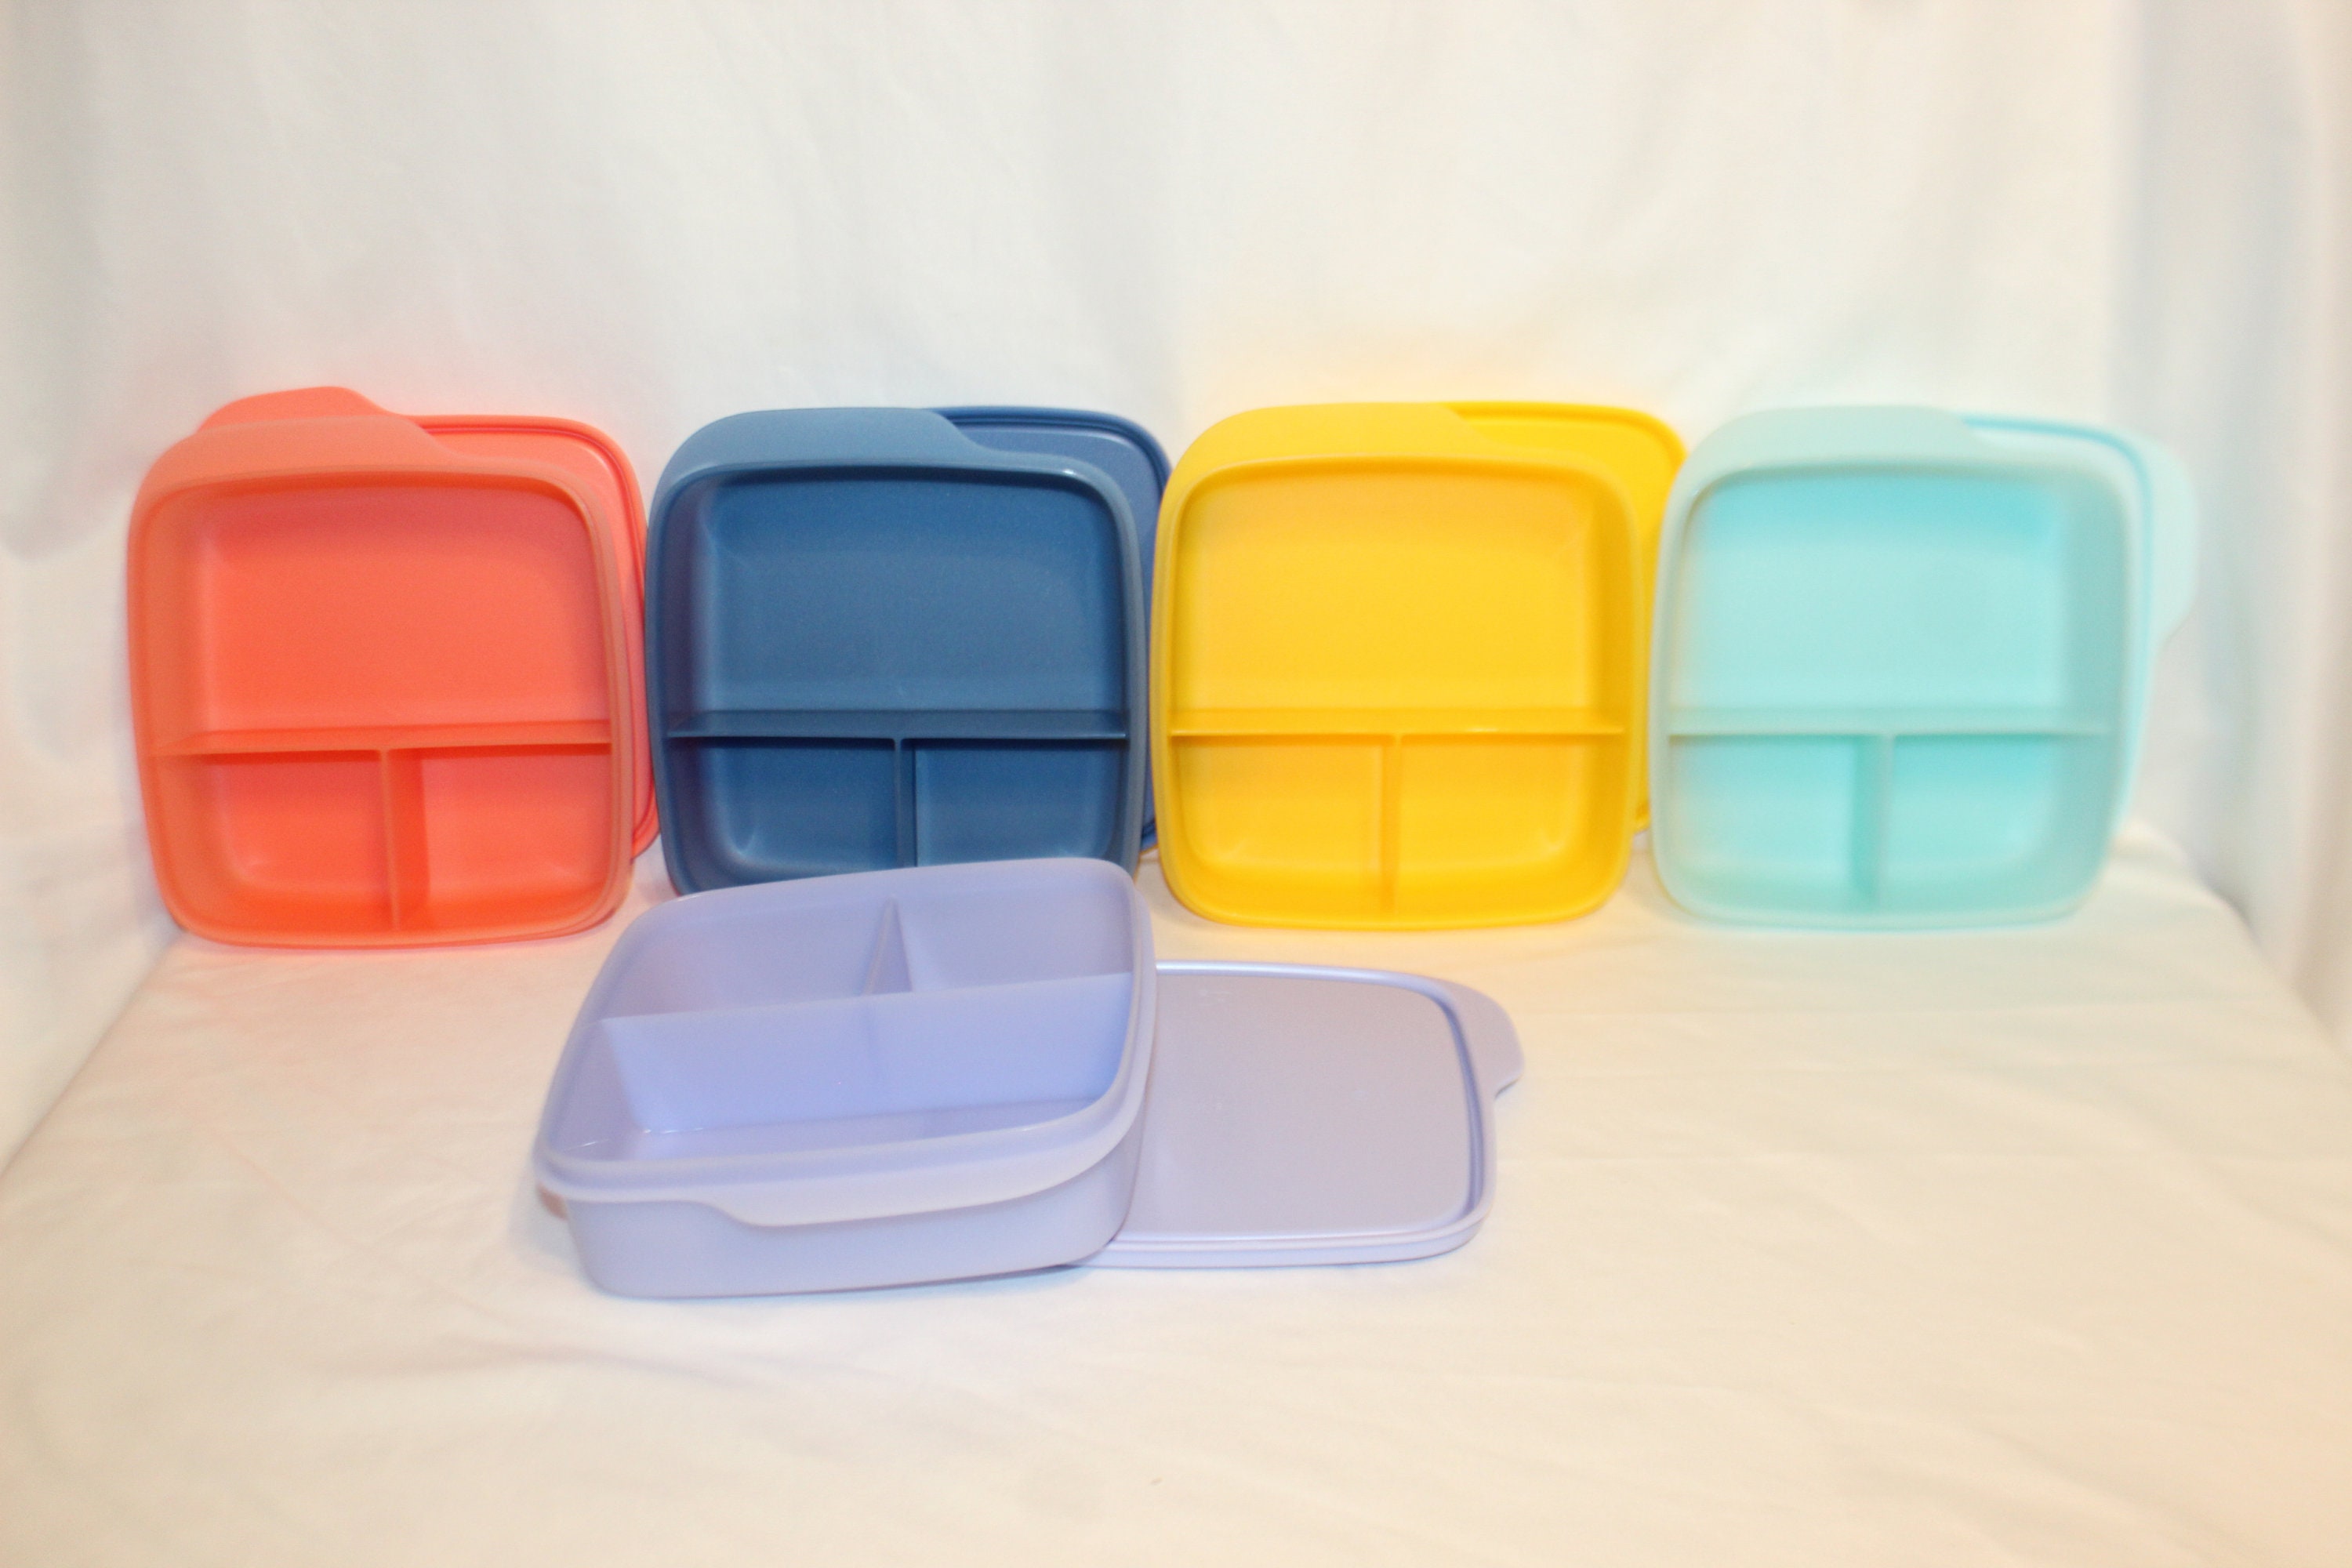 Square Silicone Lunch Box Dividers 6pcs - Bento Box Divider 2x2x1.5 - Silicone Cupcake Baking Cups - Bento Box Accessories Meal Prep Containers